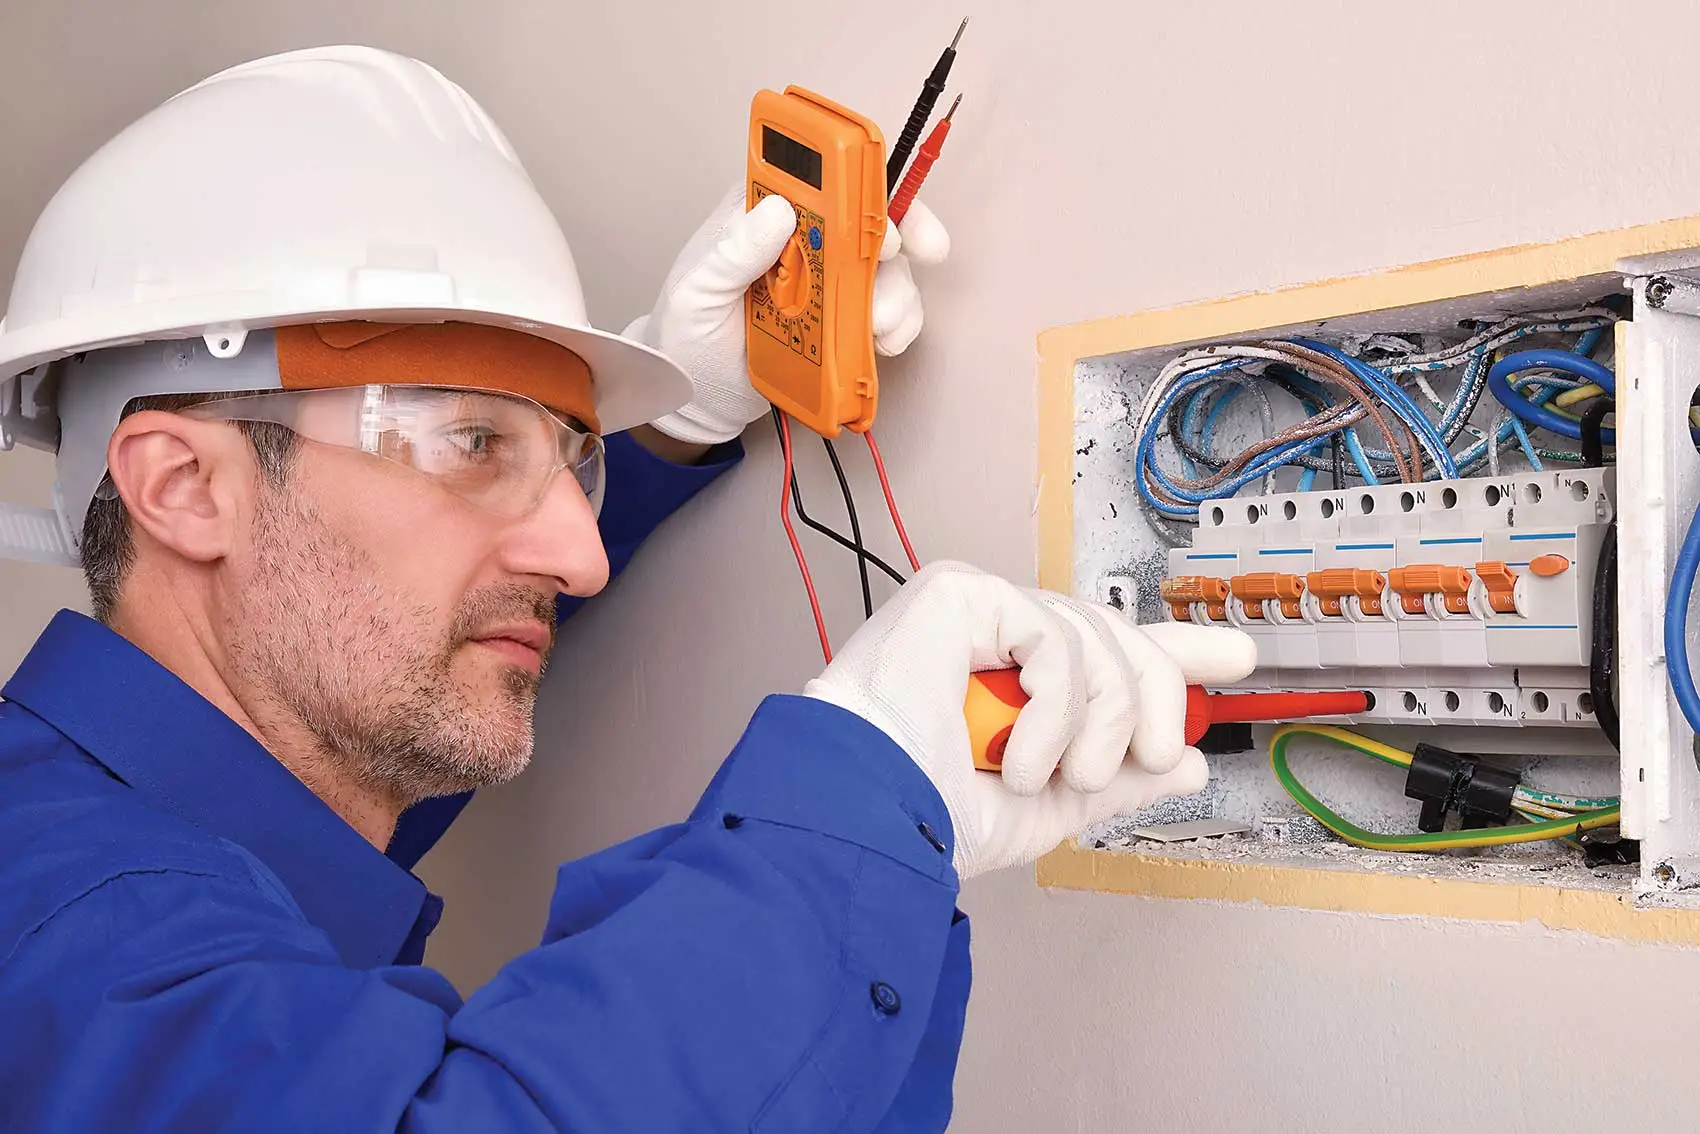 Know all about the Local electrician in Lansing